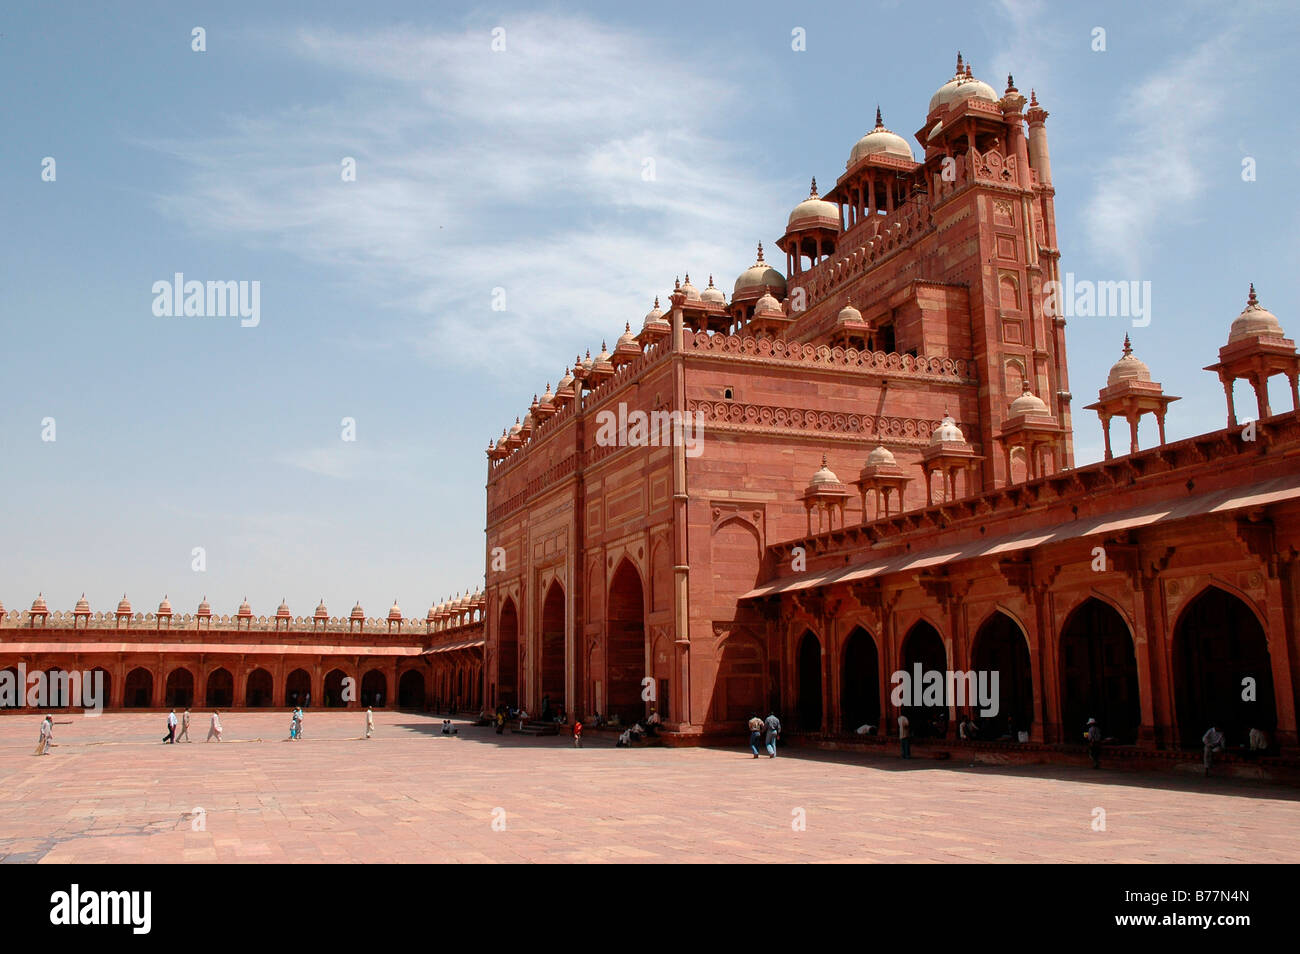 Fatehpur Sikri Majestic Fort in Rajasthan, UNESCO World Heritage Site, India, Asia Stock Photo